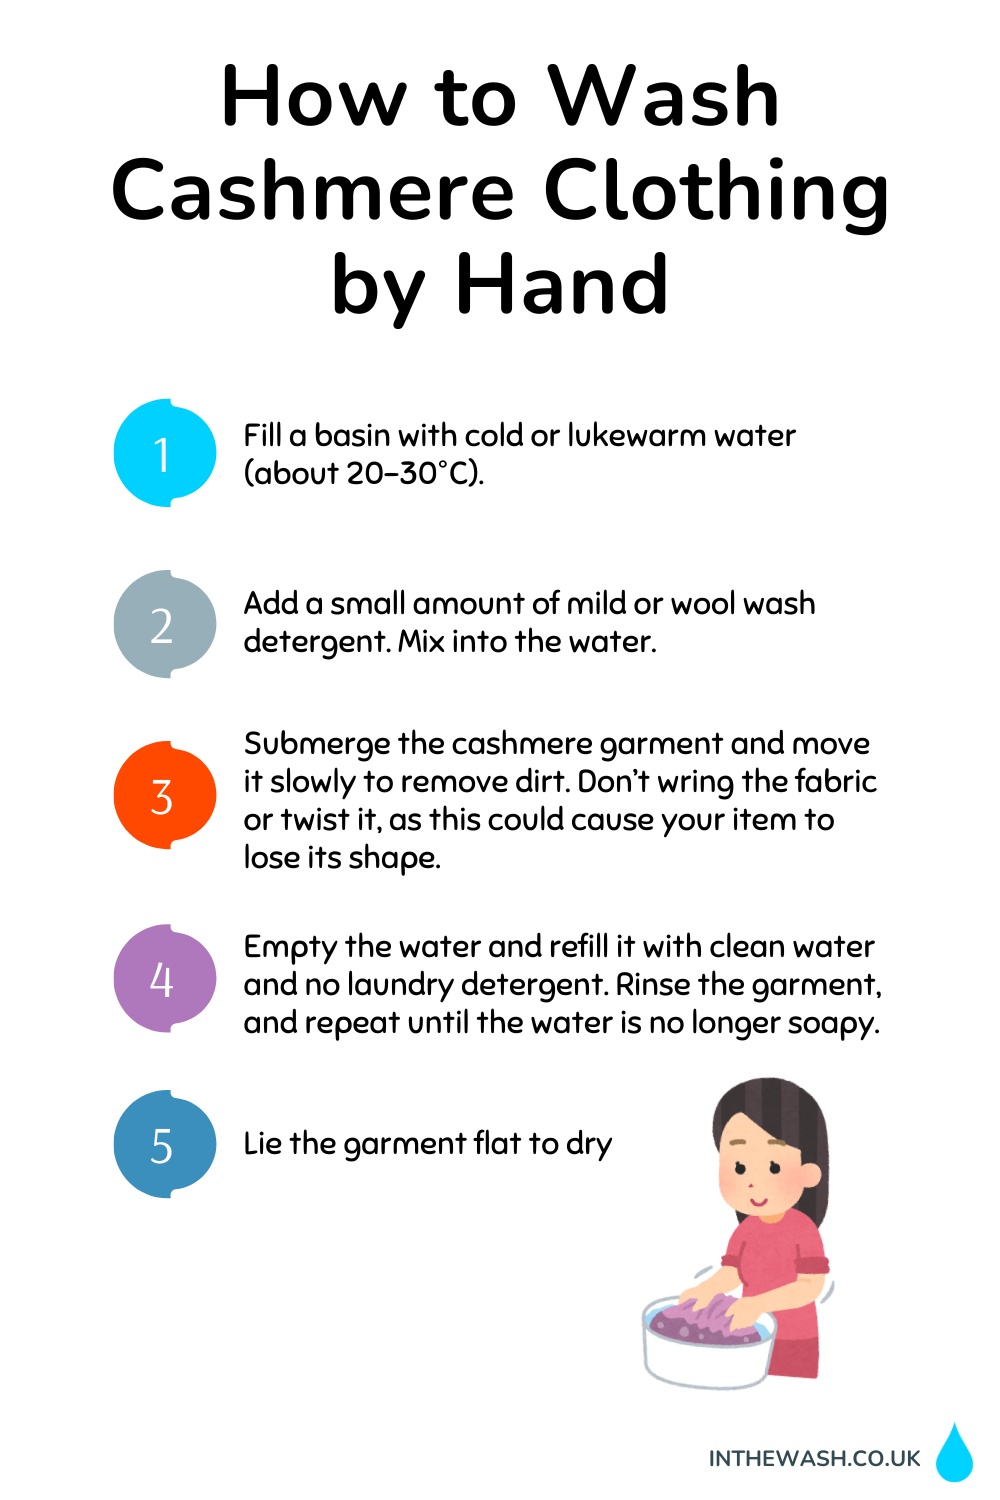 How to wash cashmere clothing by hand